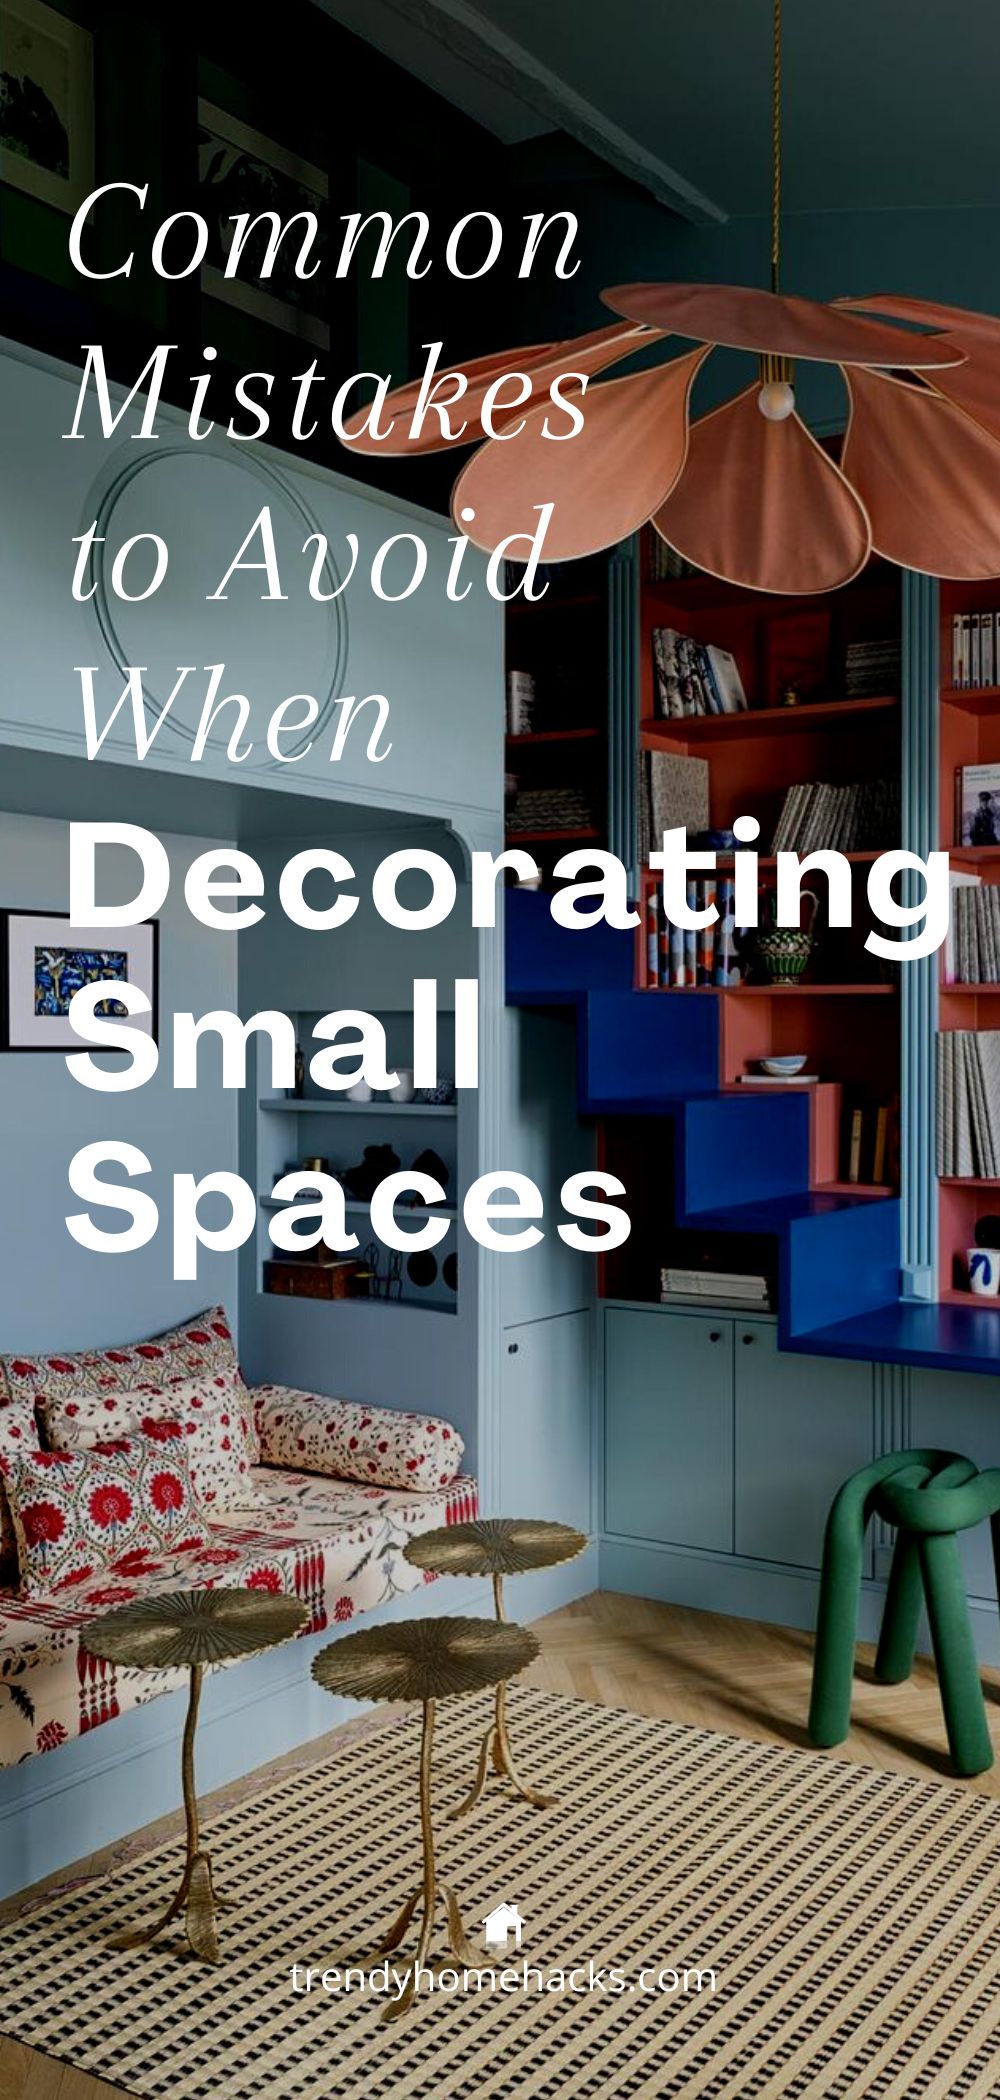 pinterest pin with text overlay 'What to avoid when decorating small spaces'.